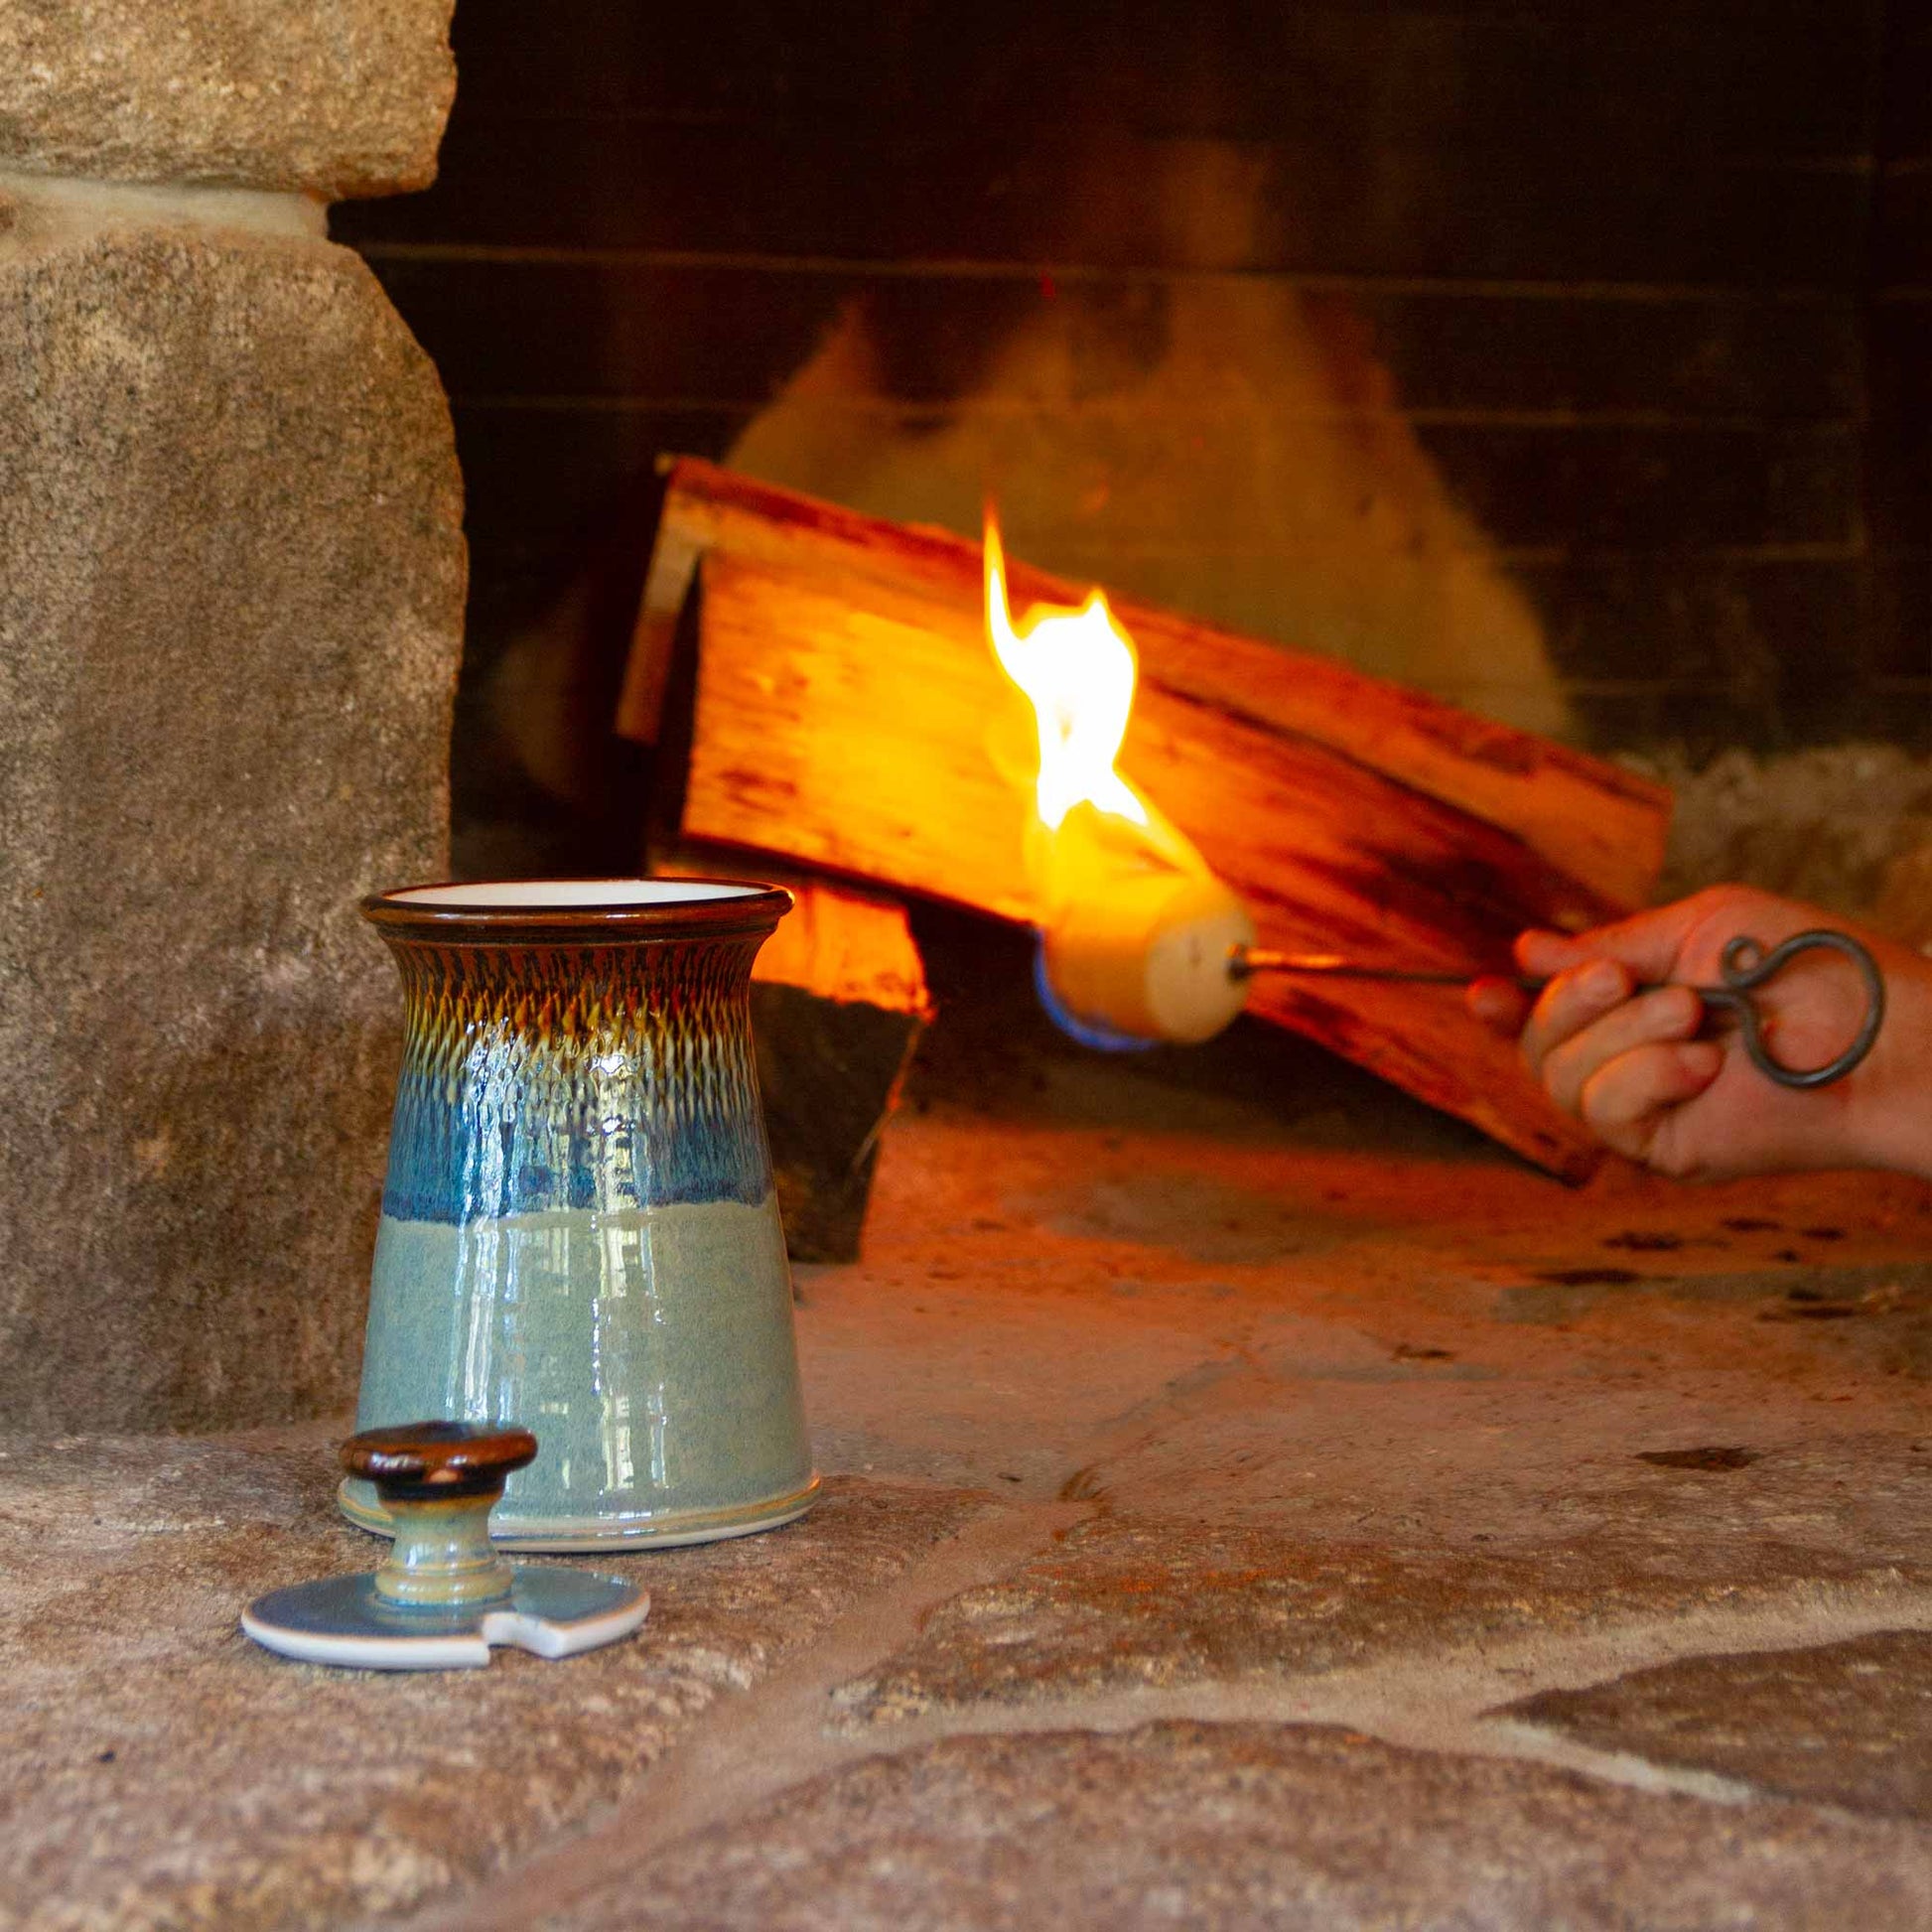 Handmade Pottery Firelighter  made by Georgetown Pottery in Maine